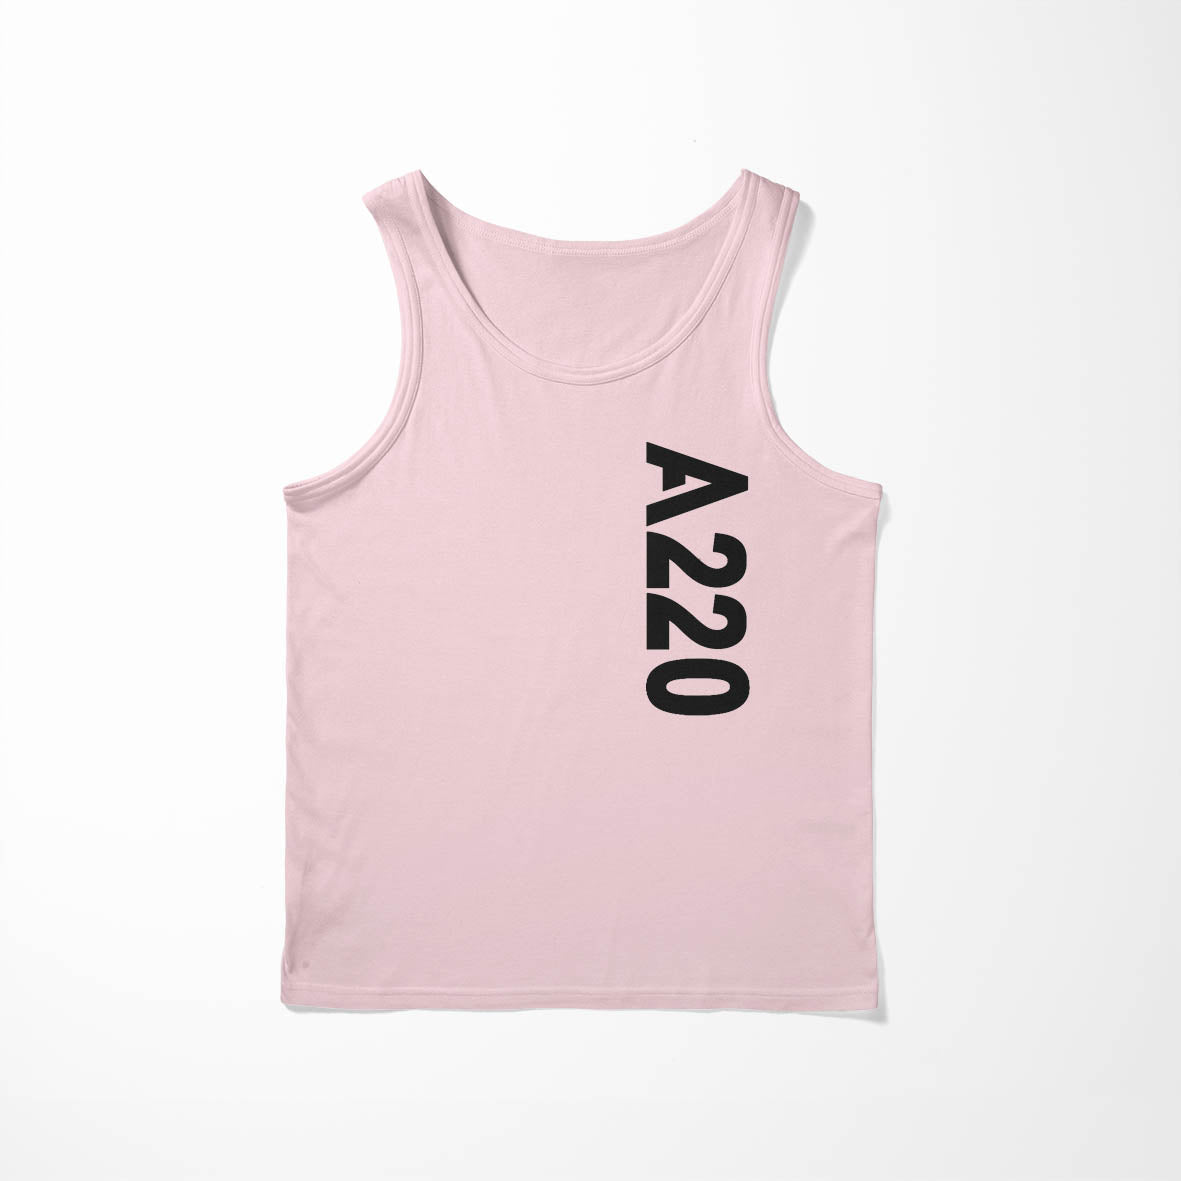 A220 Side Text Designed Tank Tops